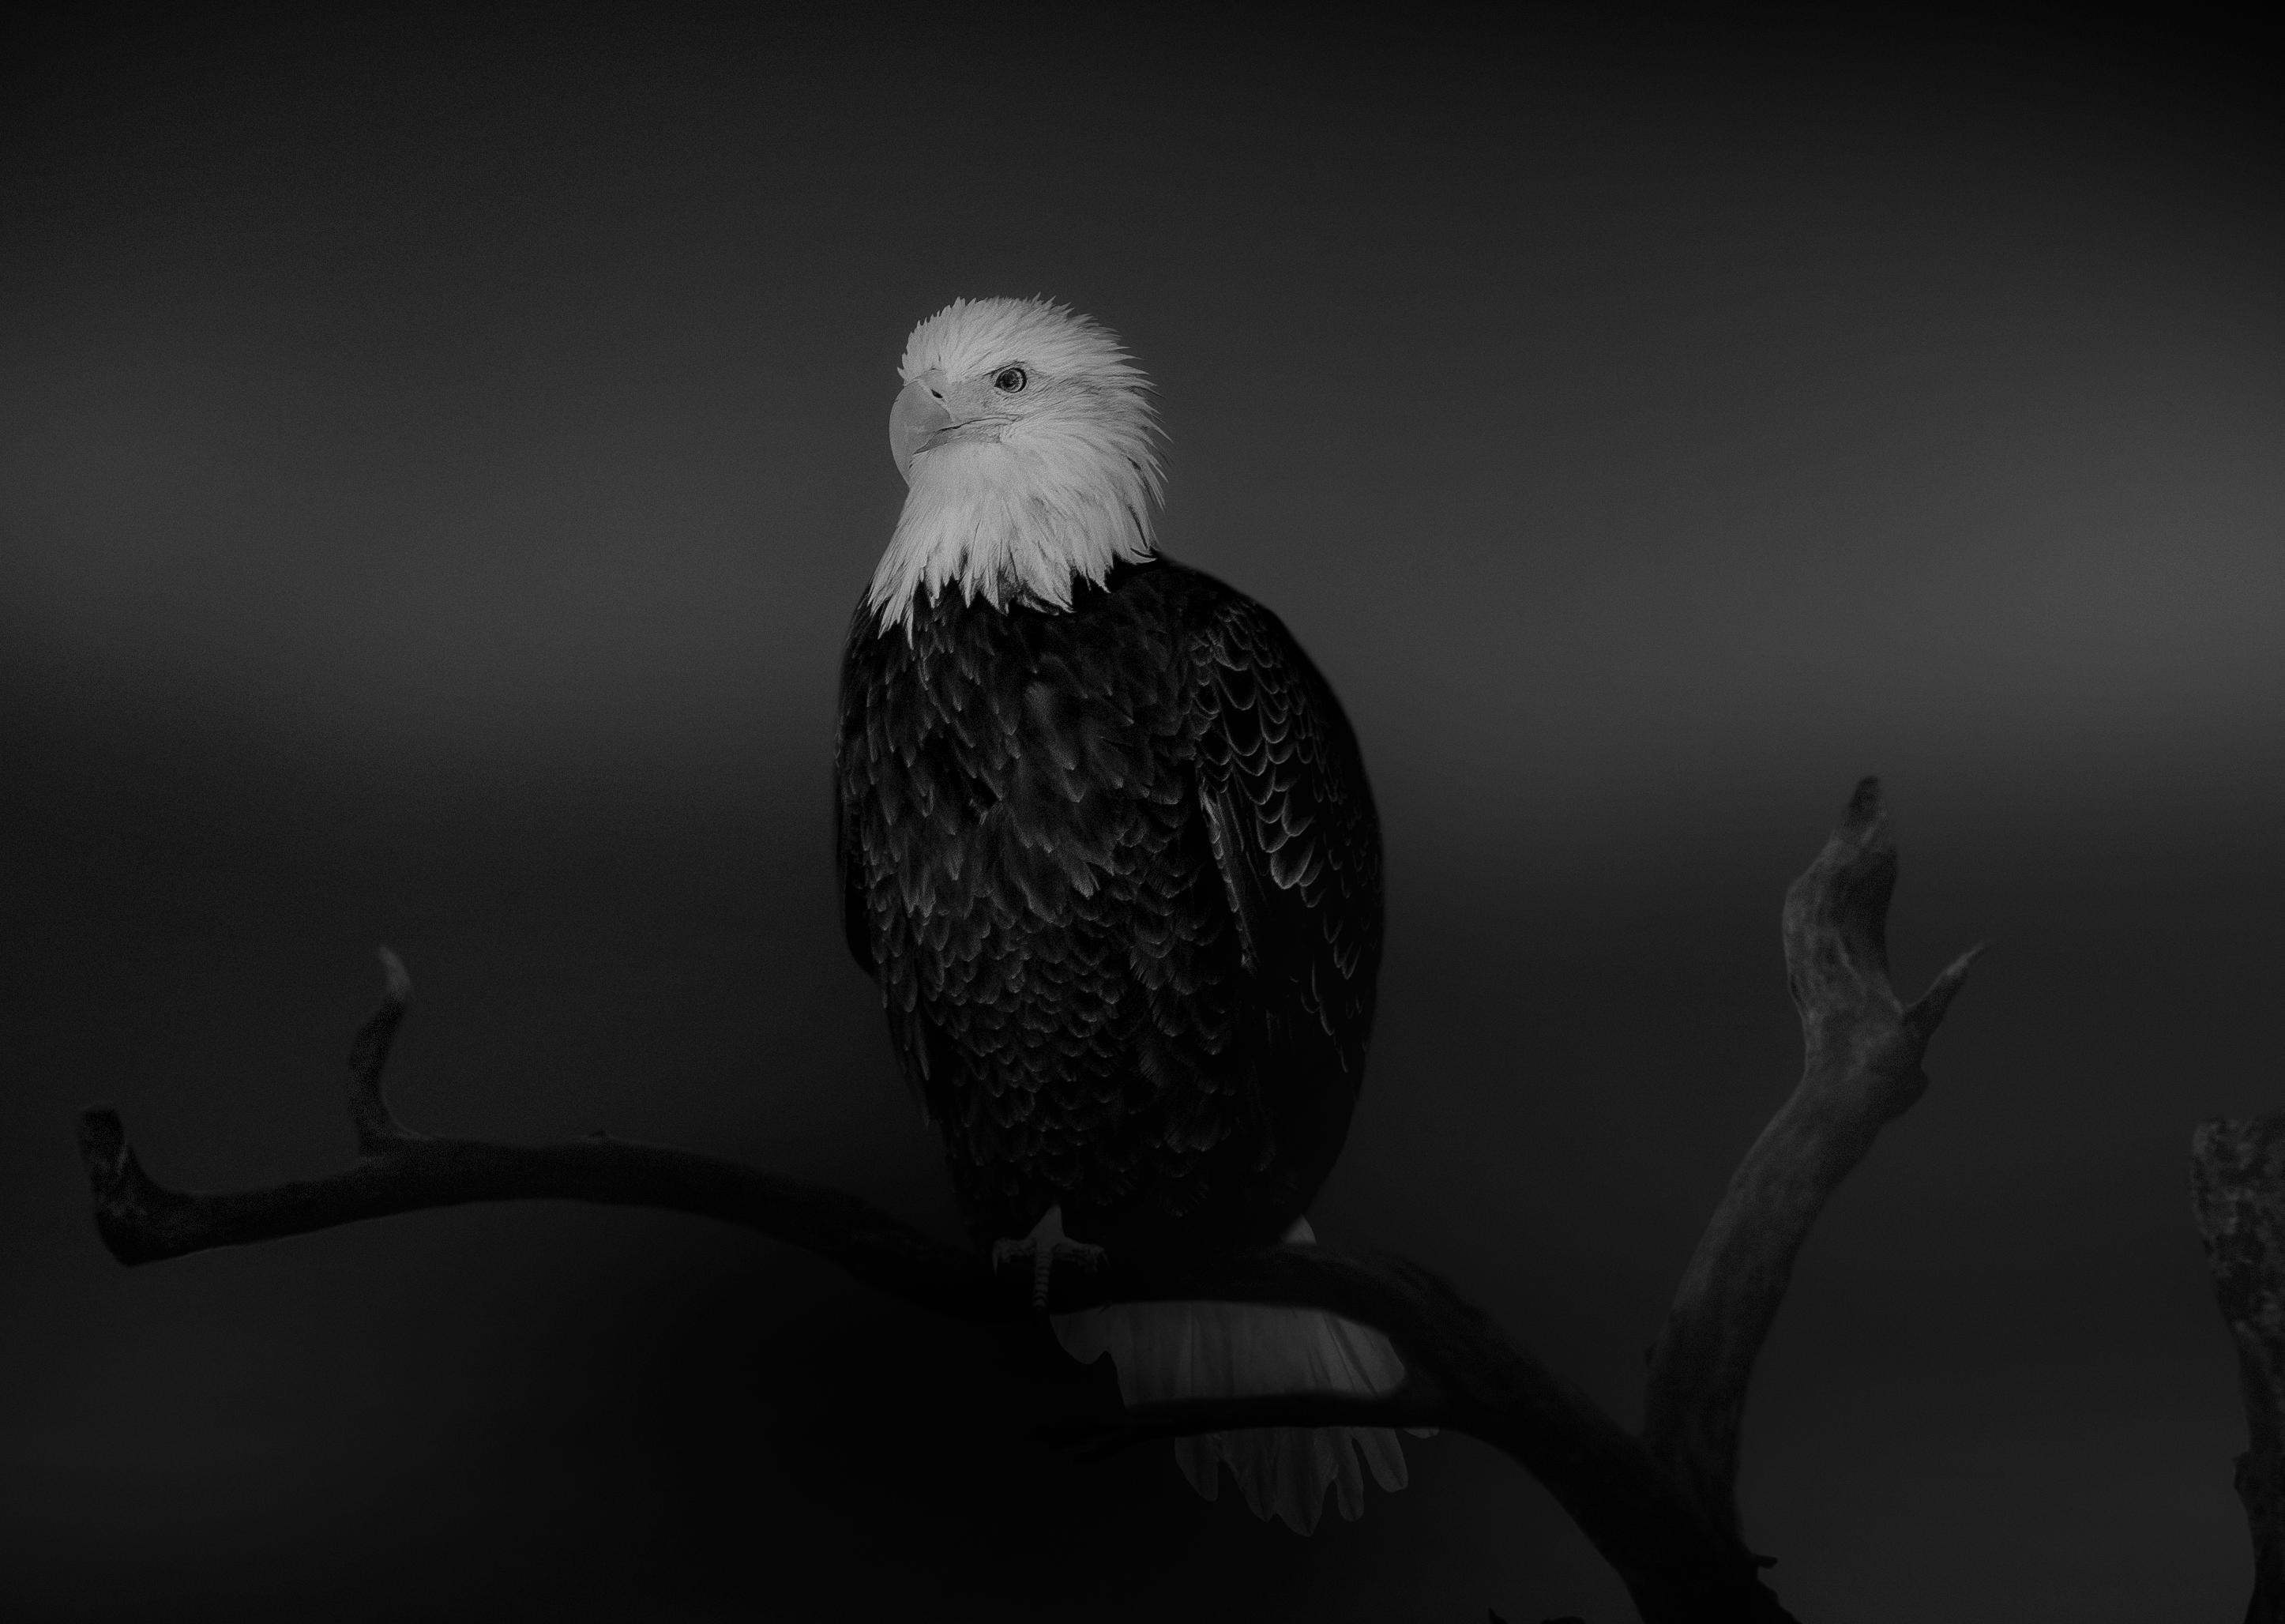 This is a contemporary photograph of an American Bald Eagle
20x30 Edition of 50. Signed by Shane. 
Printed on archival paper and using archival inks
Framing available. Inquire for rates. 


Shane Russeck has built a reputation for capturing